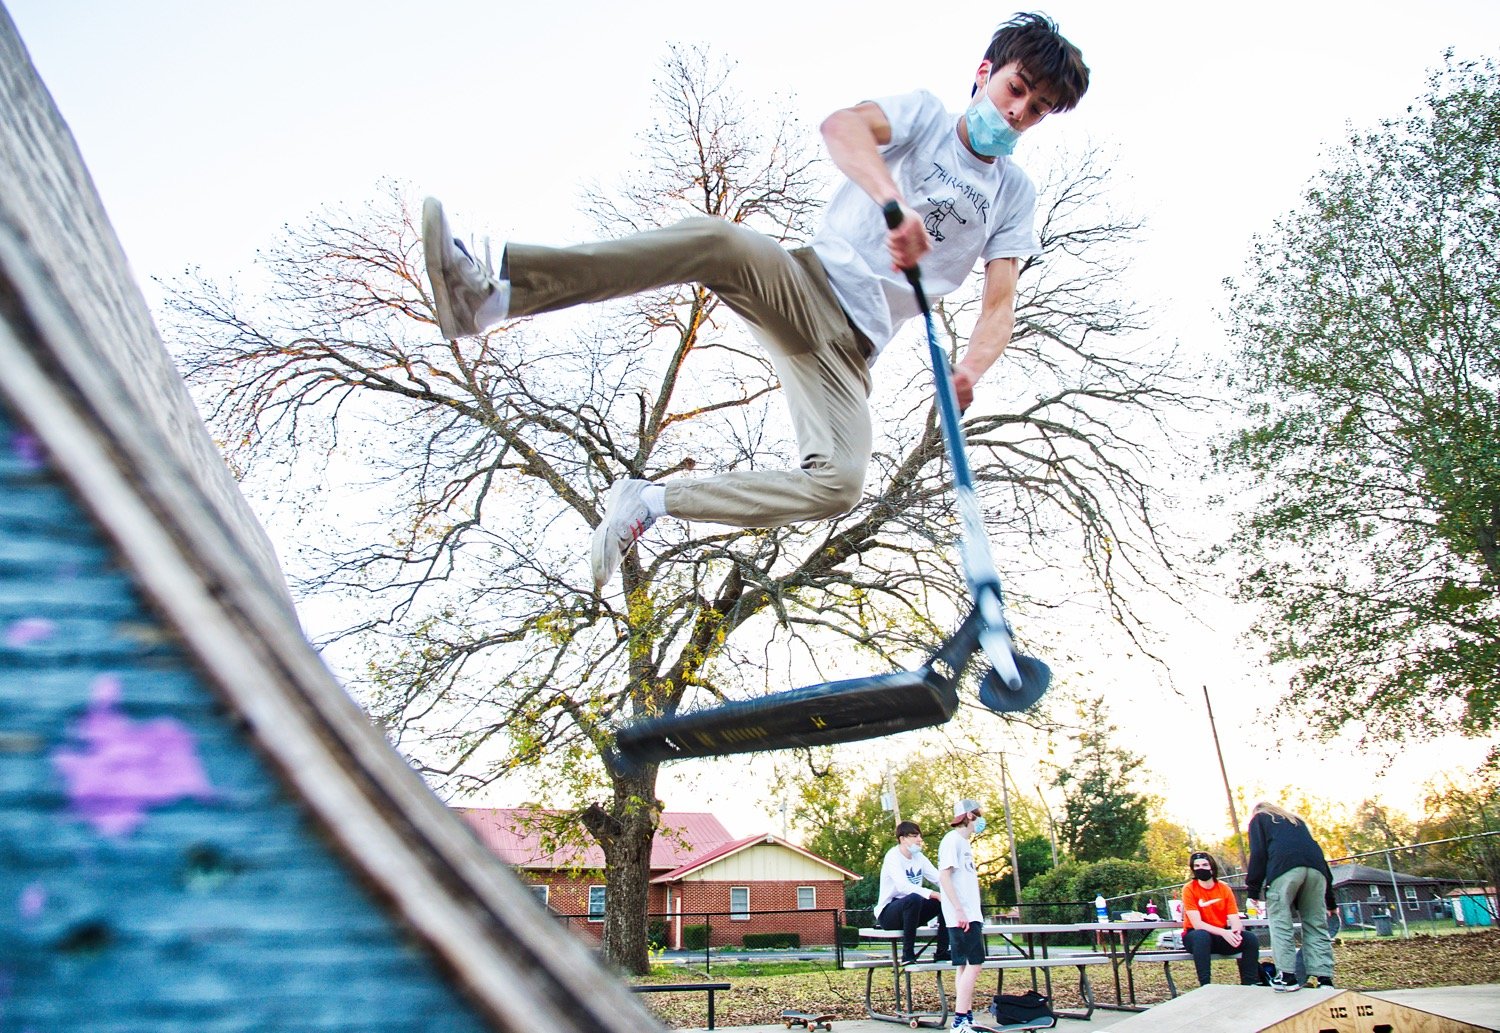 Caleb Gant performs a trick at the St. Paul Community Skate Park in Mineola.
[see more tricks]